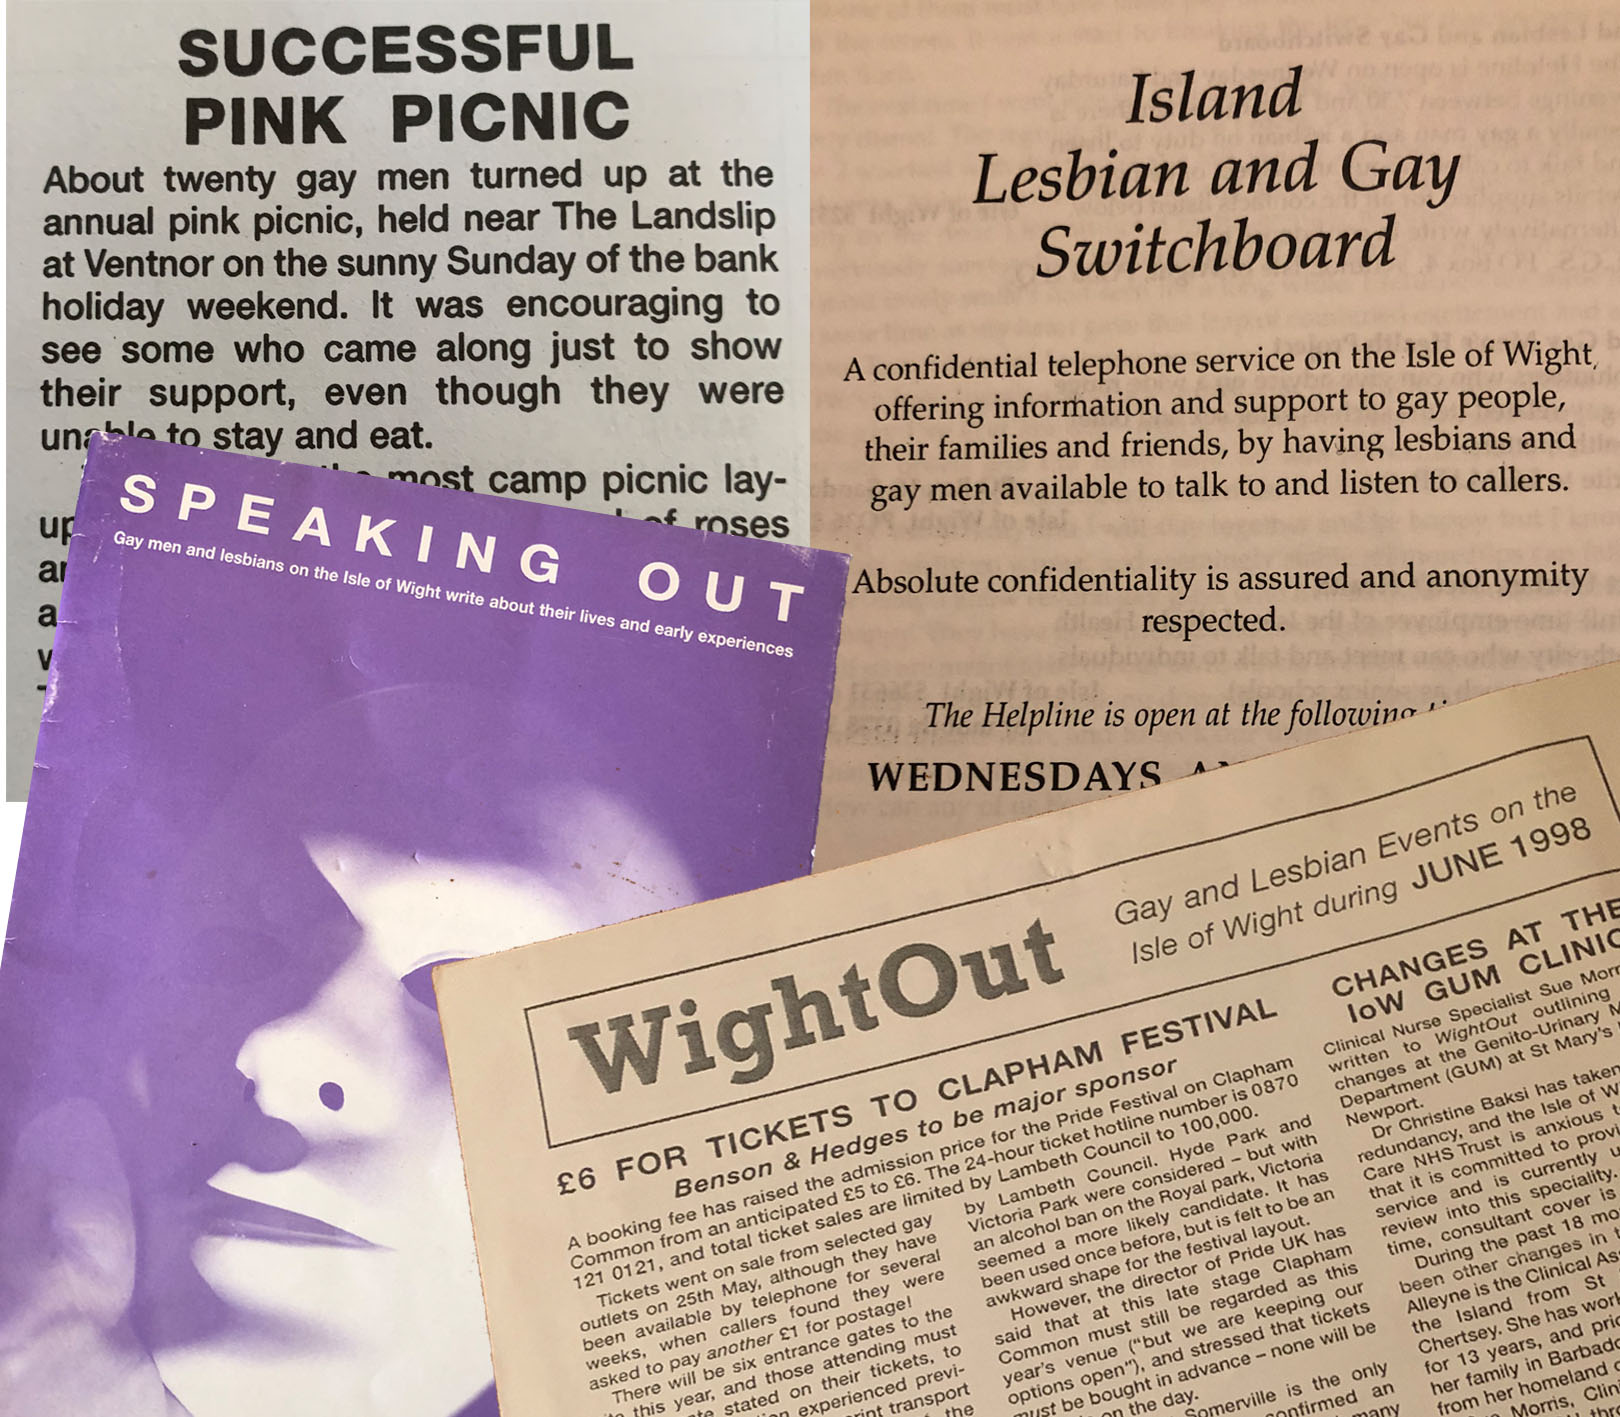 Four old archive documents – including newspapers and brochures – are photographed. They reference the Isle of Wight’s LGBTQ+ culture. 